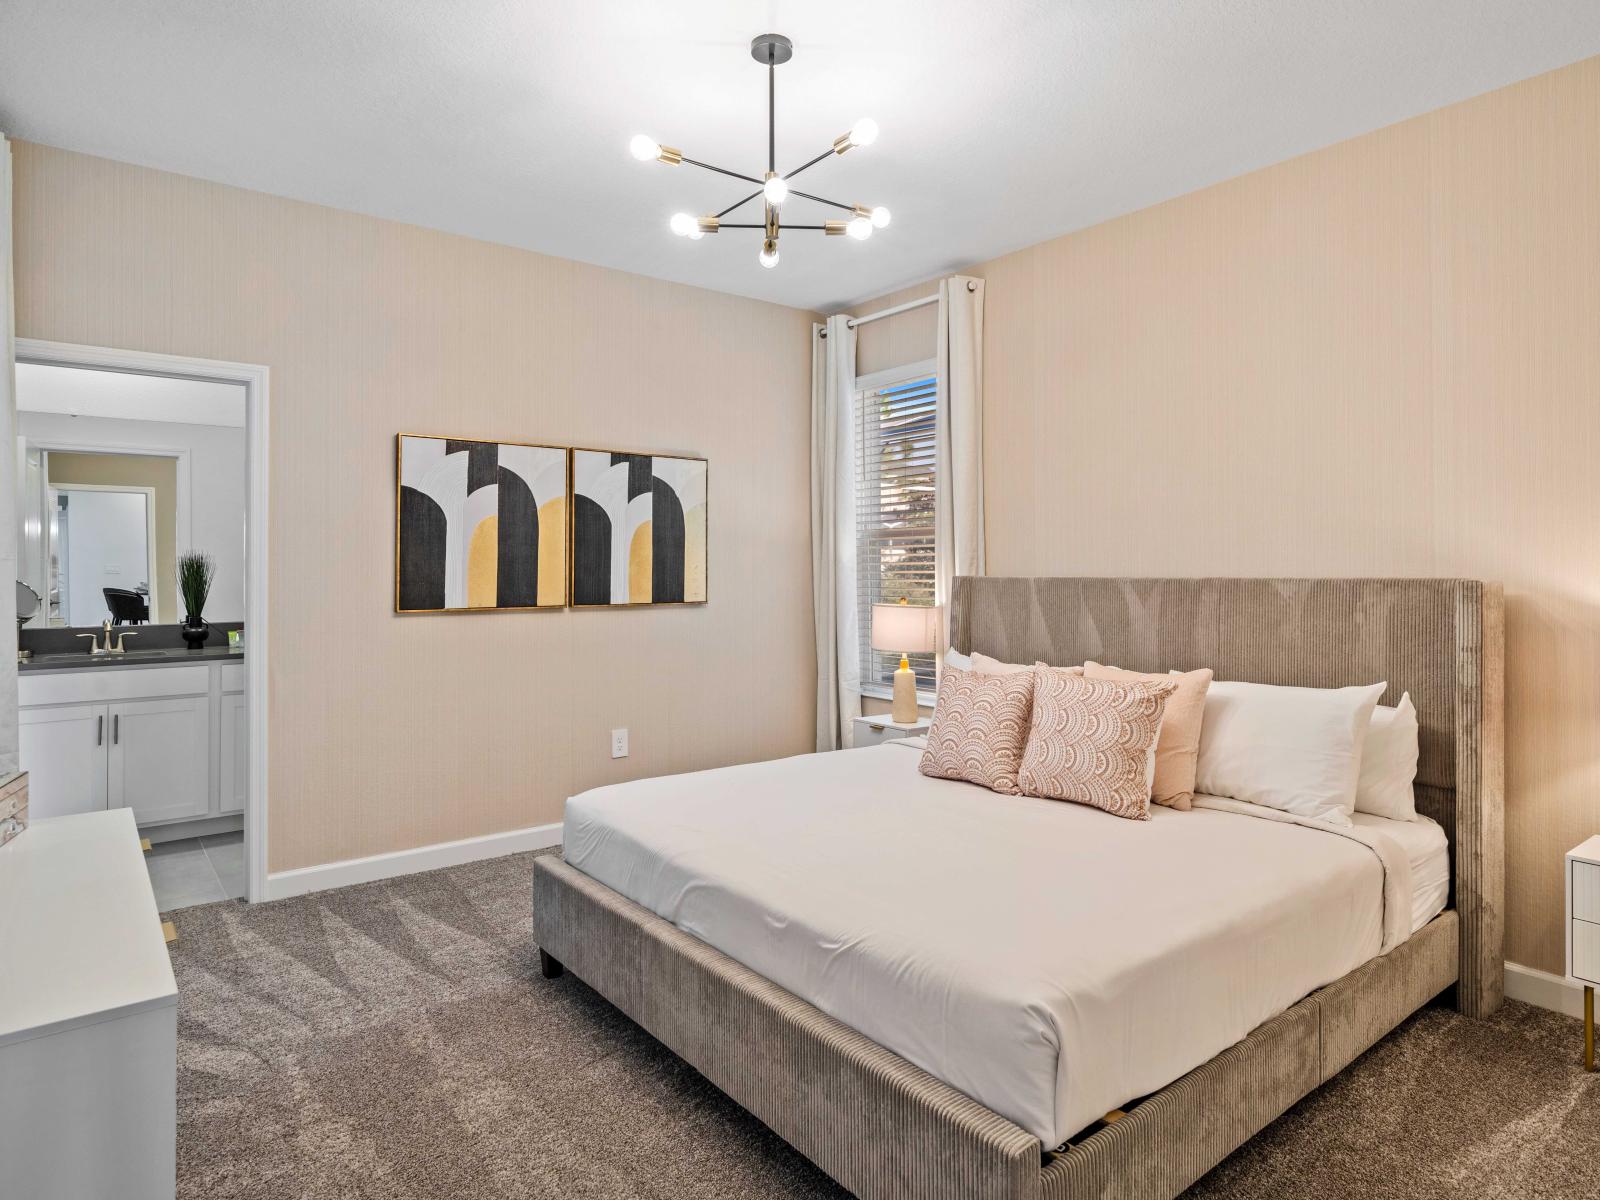 Deluxe Bedroom of the Home in Davenport Florida - Smart TV and Netflix - Thoughtfully designed bedroom featuring functional and stylish furniture - En-suite Bathroom for privacy